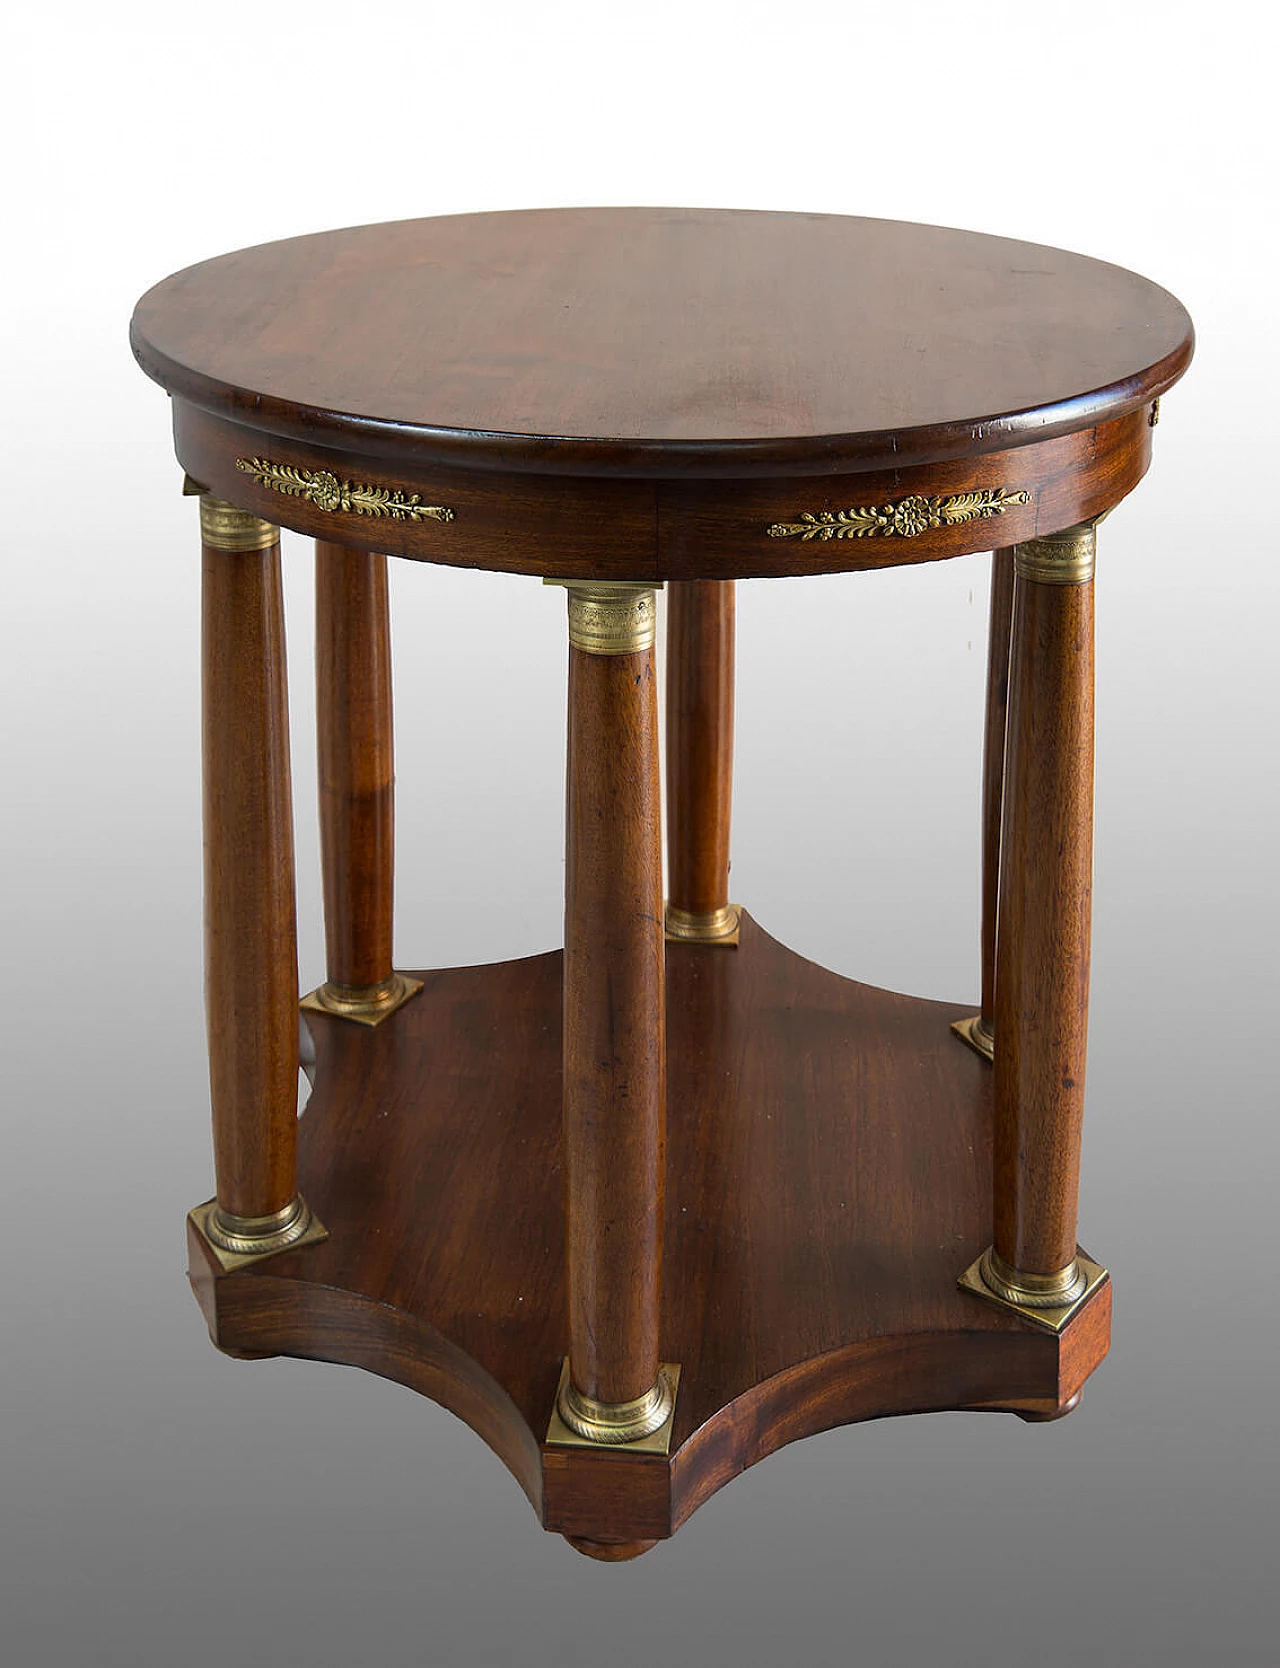 French Empire mahogany side table with bronze details, 19th century 1